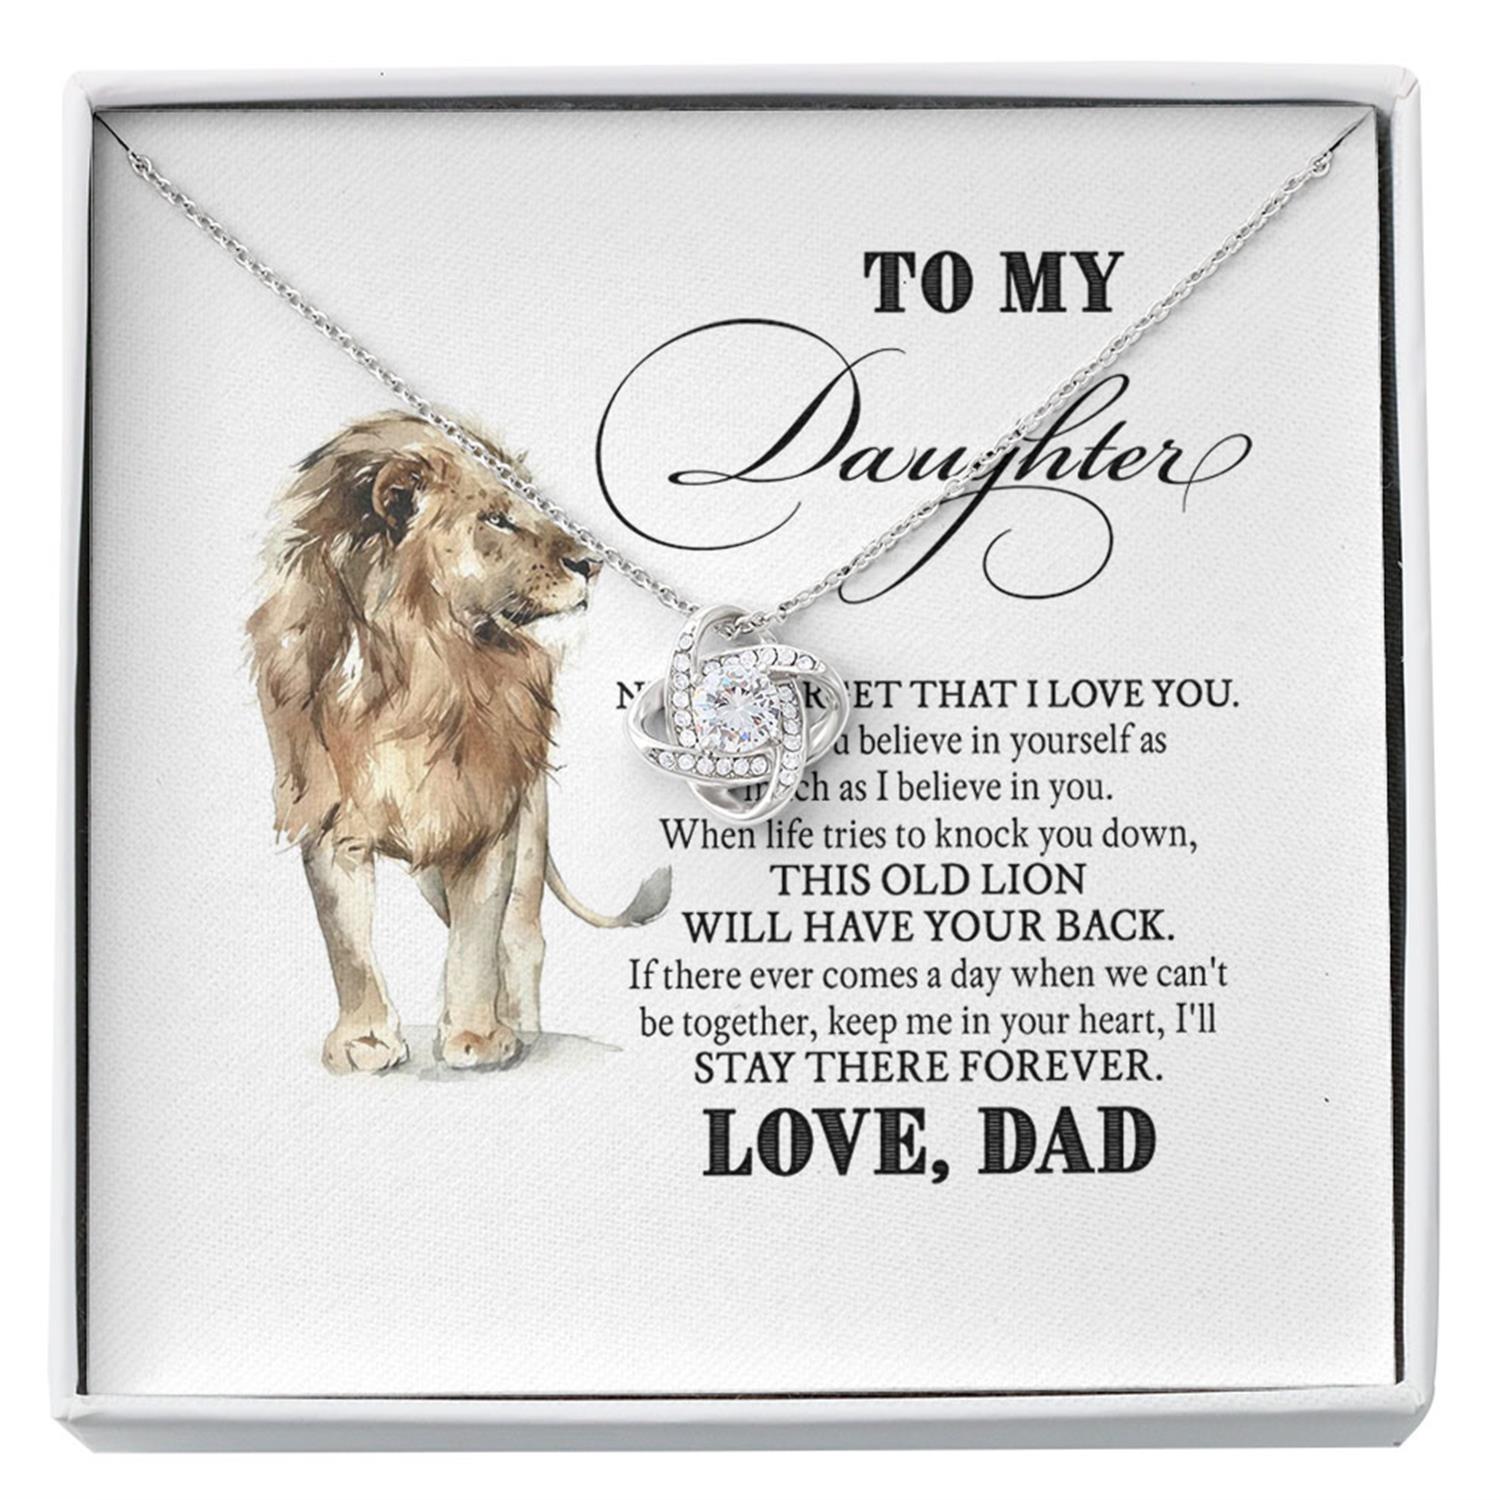 Daughter Necklace, To My Daughter "This Old Lion" Love Knot Necklace Gift From Dad Mom Custom Necklace